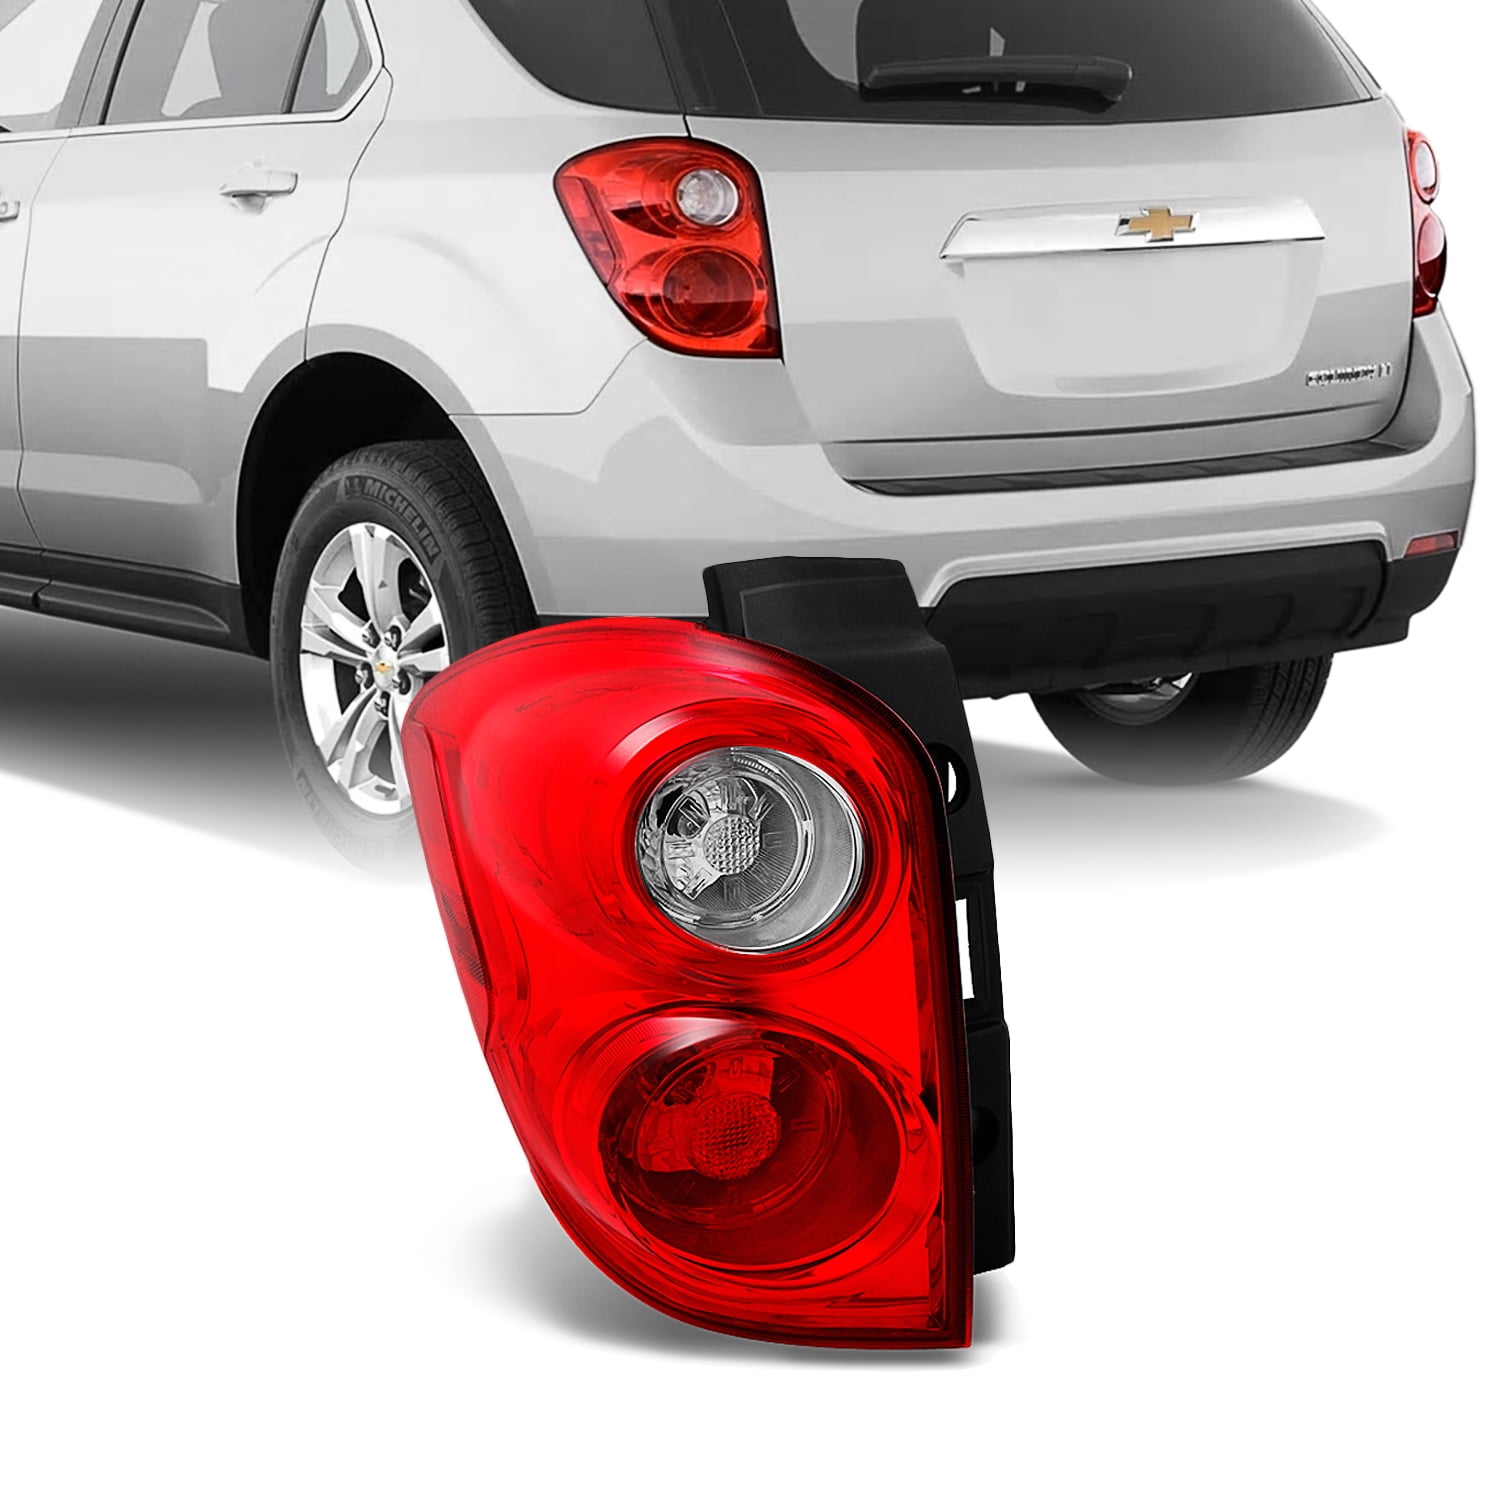 CHROME TRIM BEZEL TAIL LIGHTS COVER COVERS FOR 2010-2015 CHEVY EQUINOX 